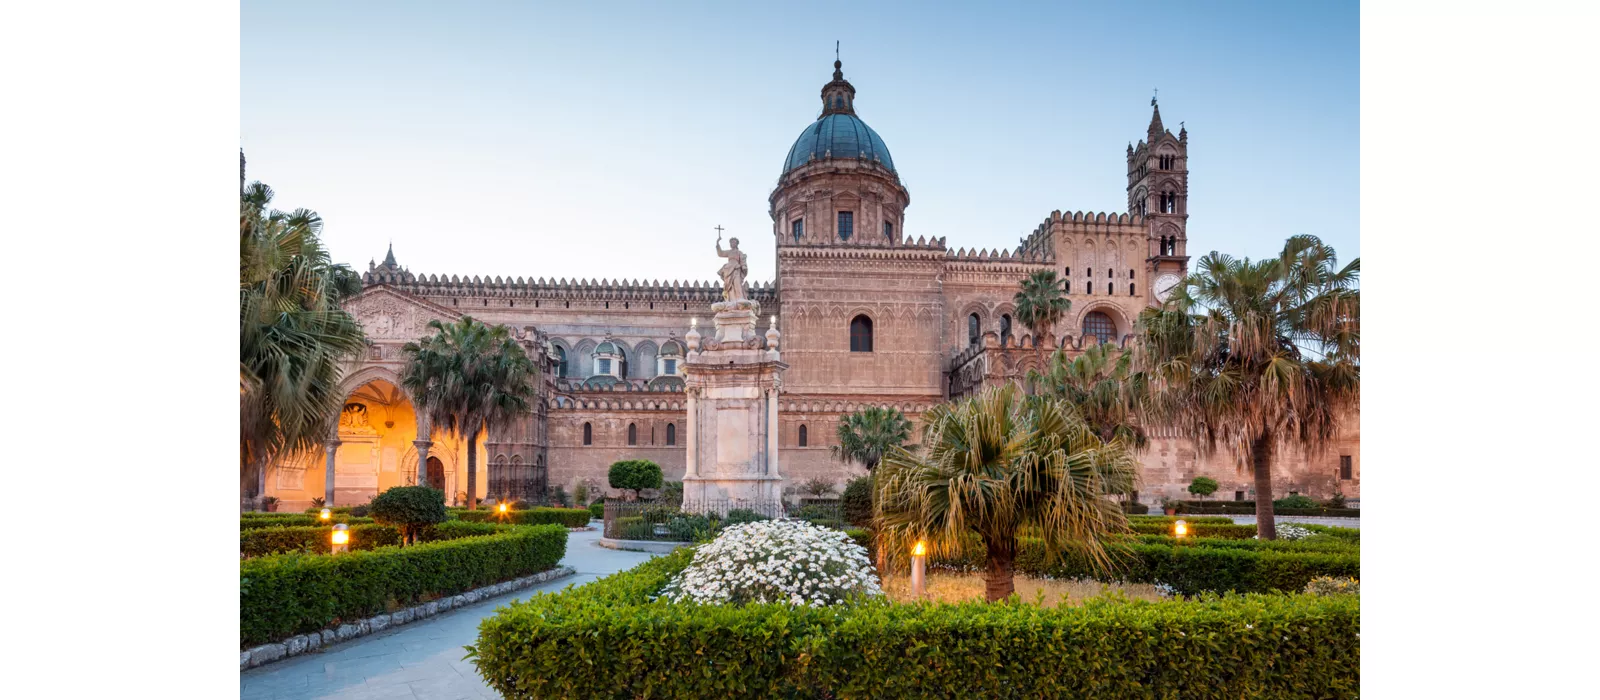 the cathedral of palermo